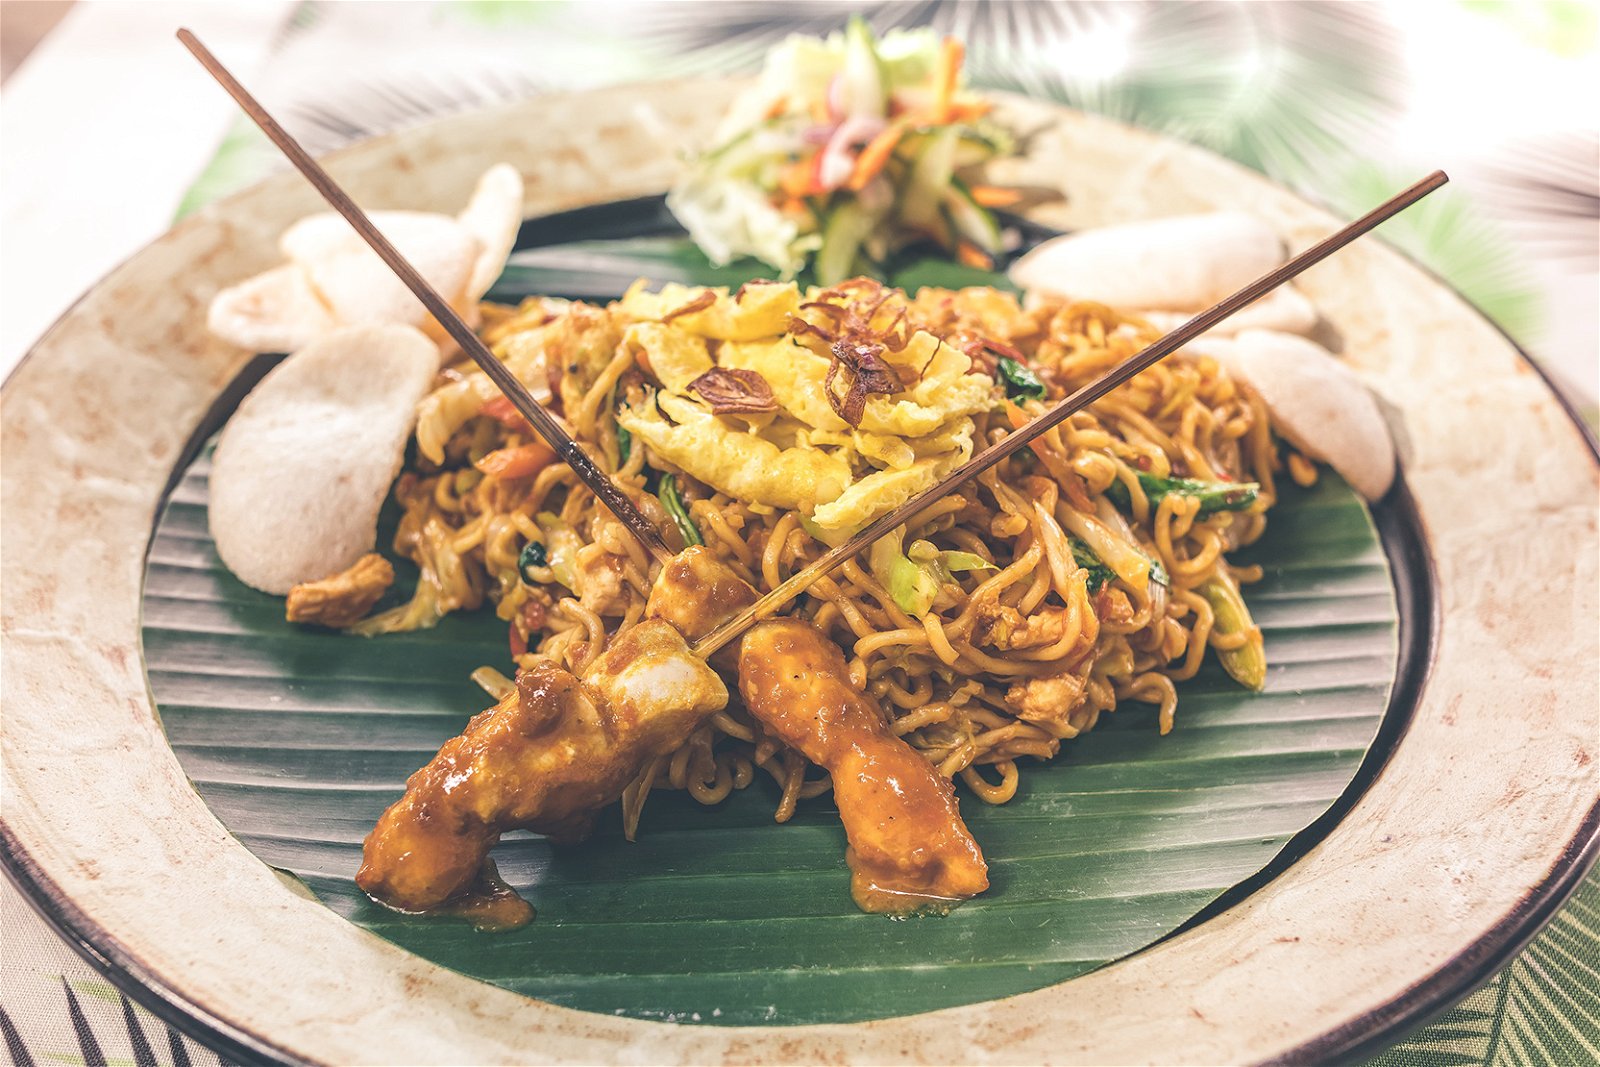 Bali Traditional Food: 11 Local Dishes You Must Try